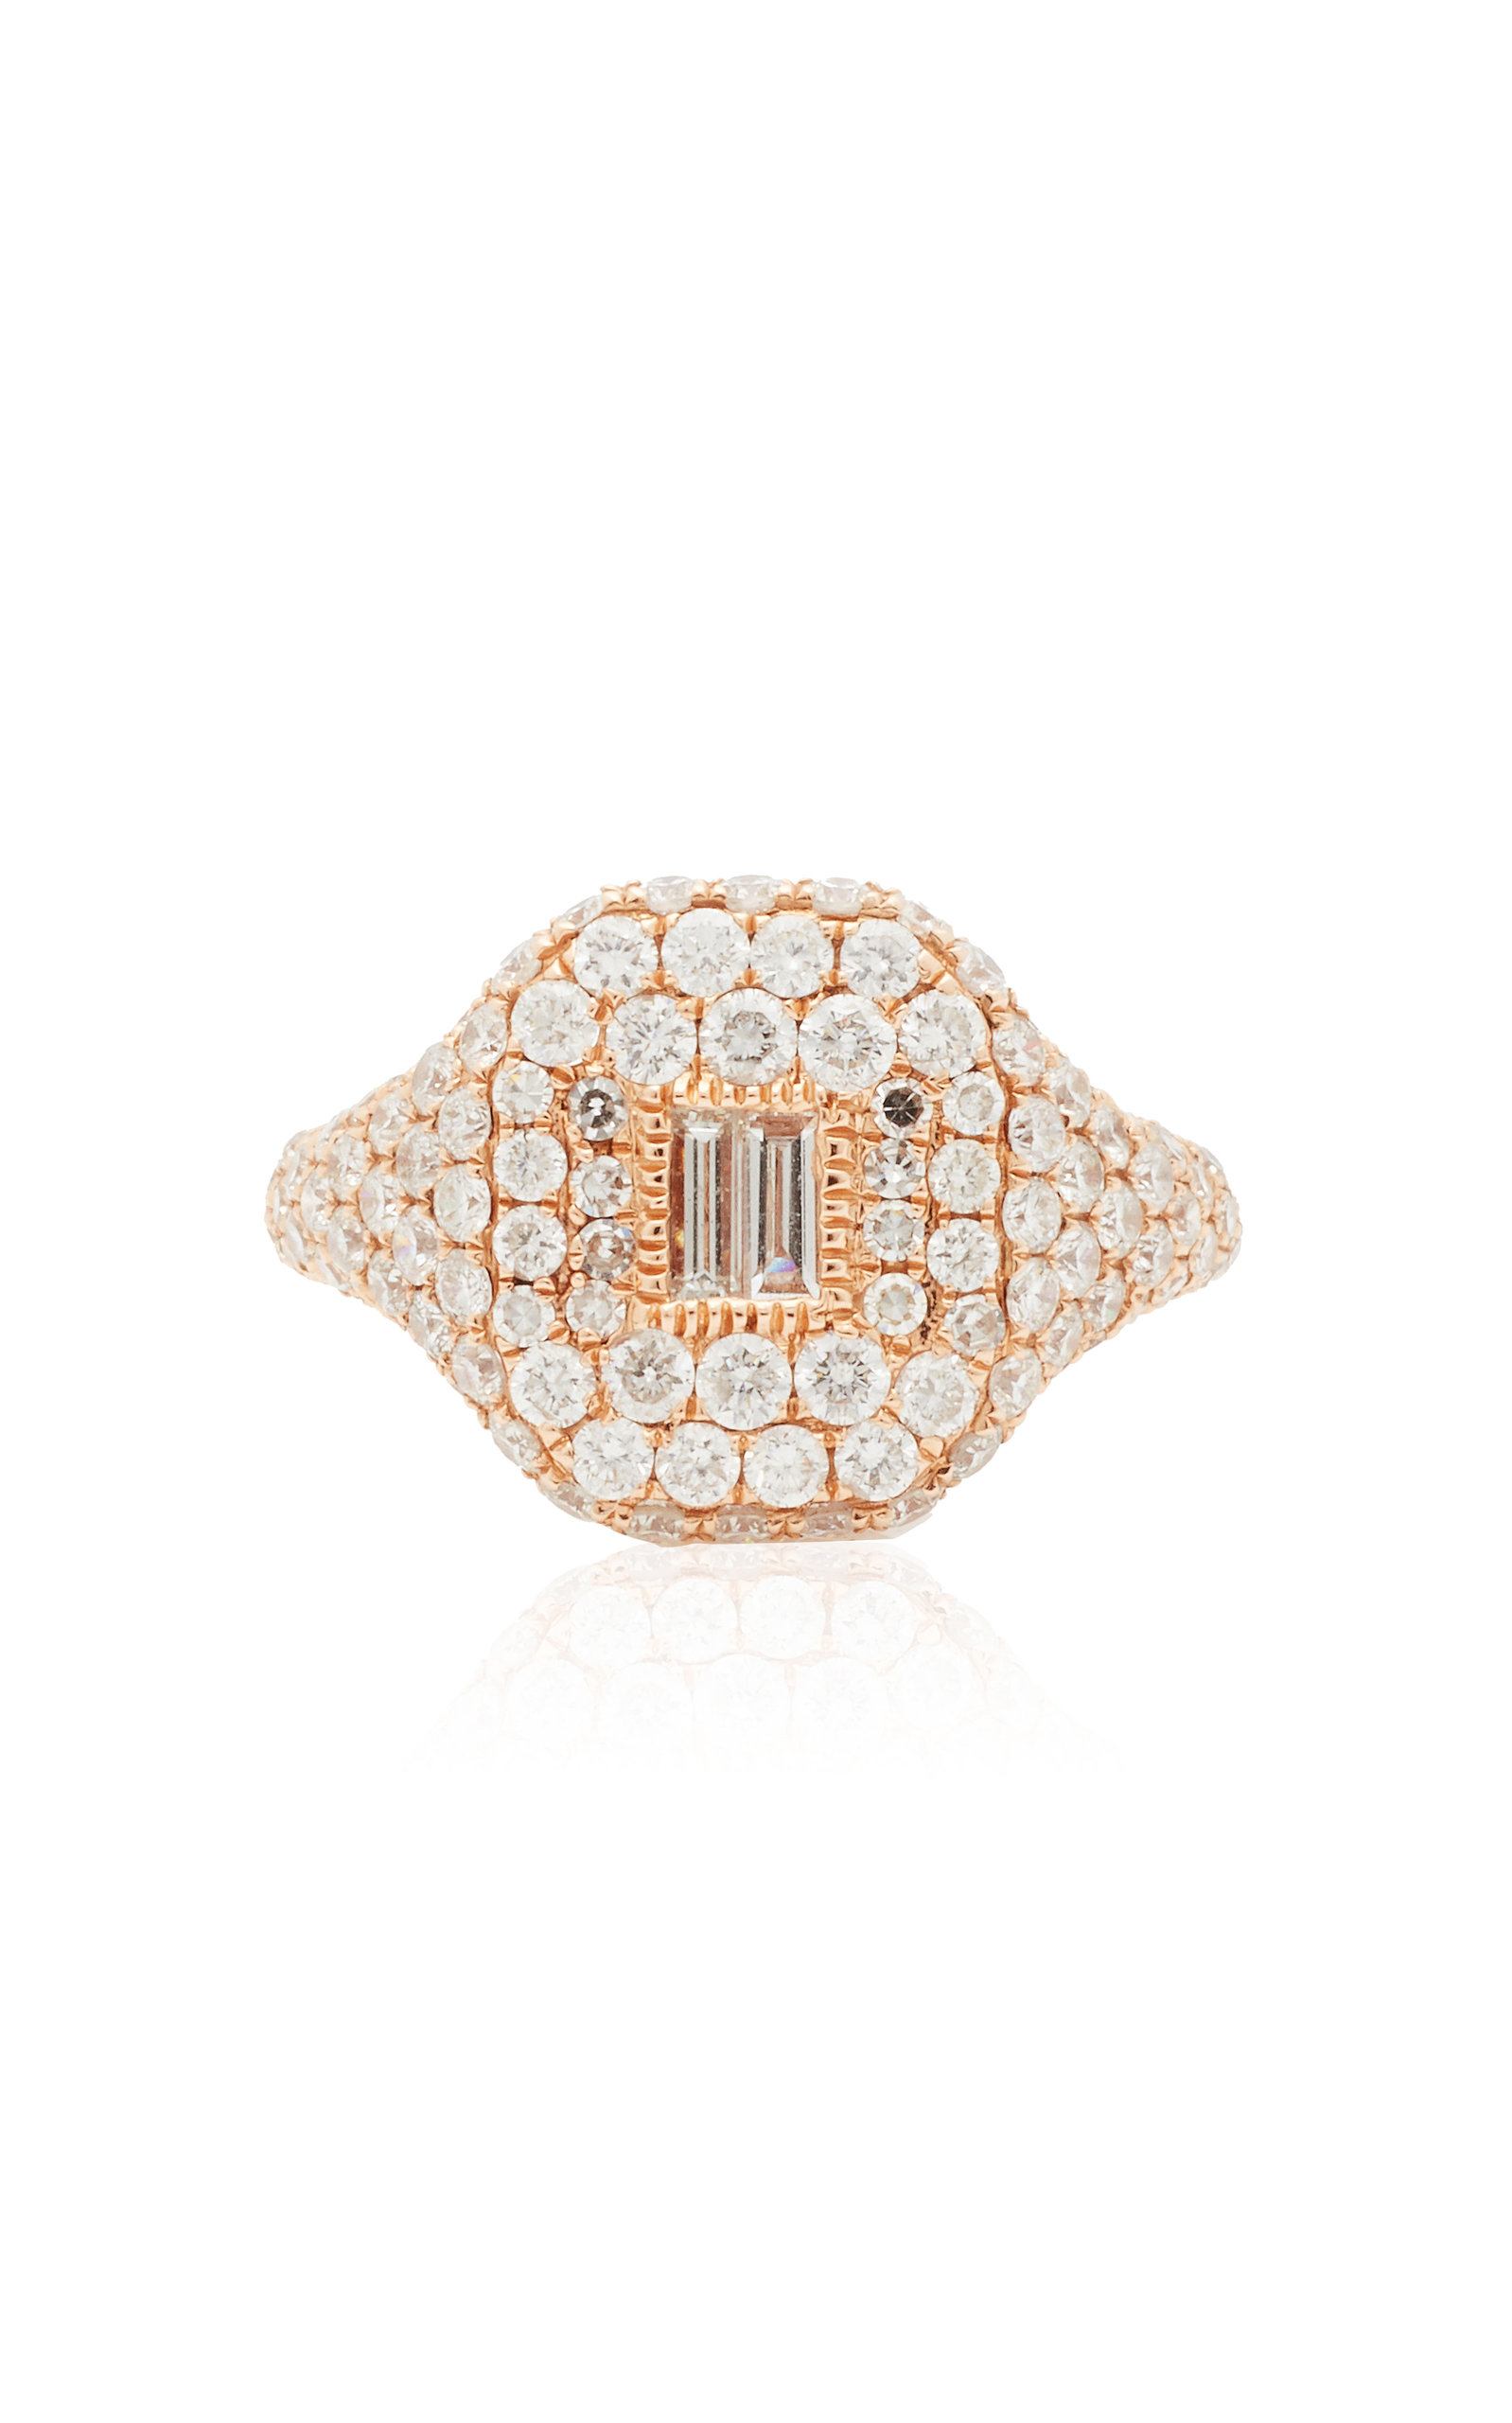 SHAY - Women's 18K Rose Gold Essential Pave Pinky Ring with Baguette Diamond Center - Rose Gold - Moda Operandi - Gifts For Her